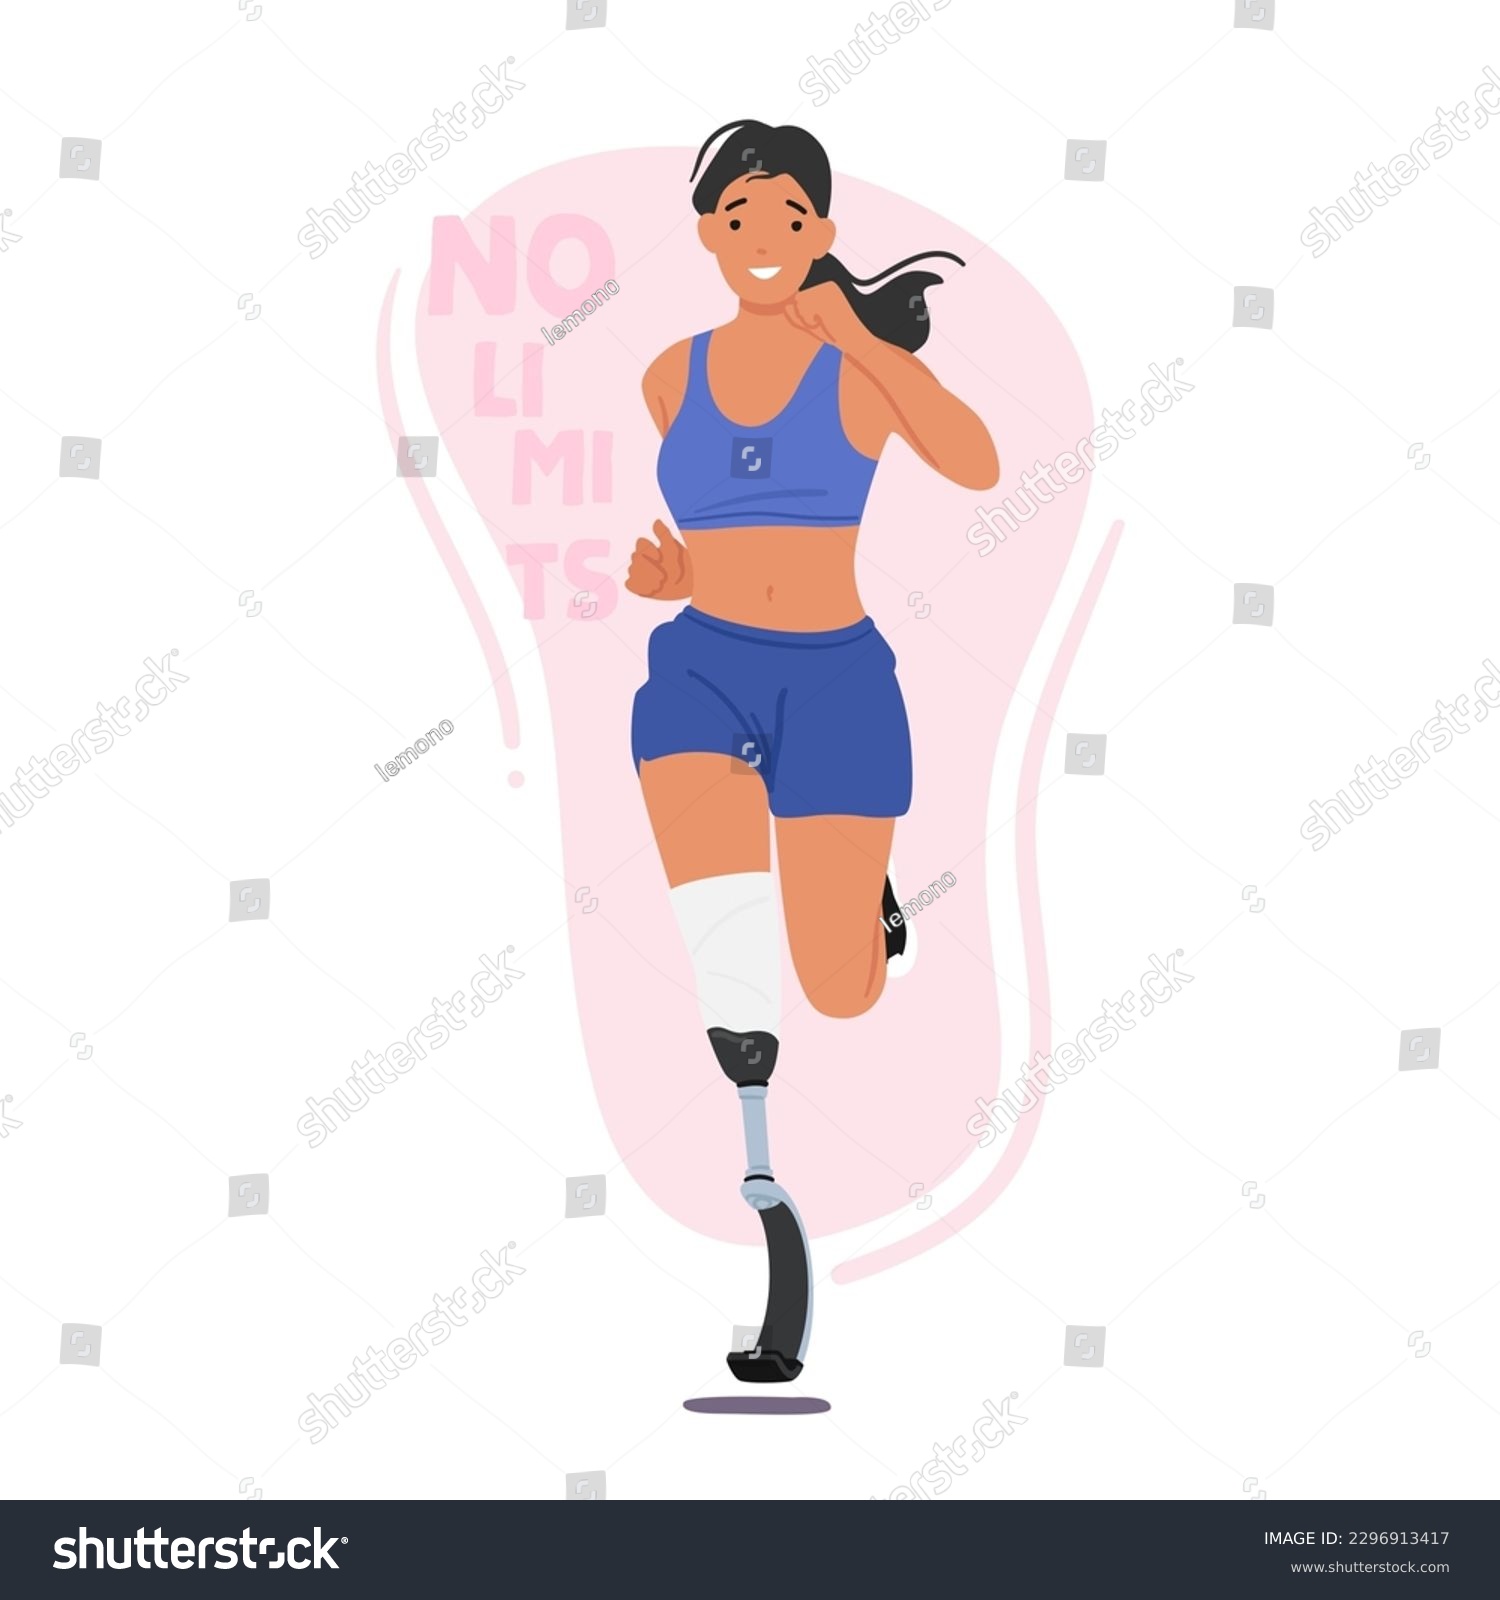 SVG of Athletic Woman With Leg Prosthesis Running Energetically On A Track With Determination And Skill, Defying Limits And Inspiring Others. Handicapped Female Sports Character. Cartoon Vector Illustration svg